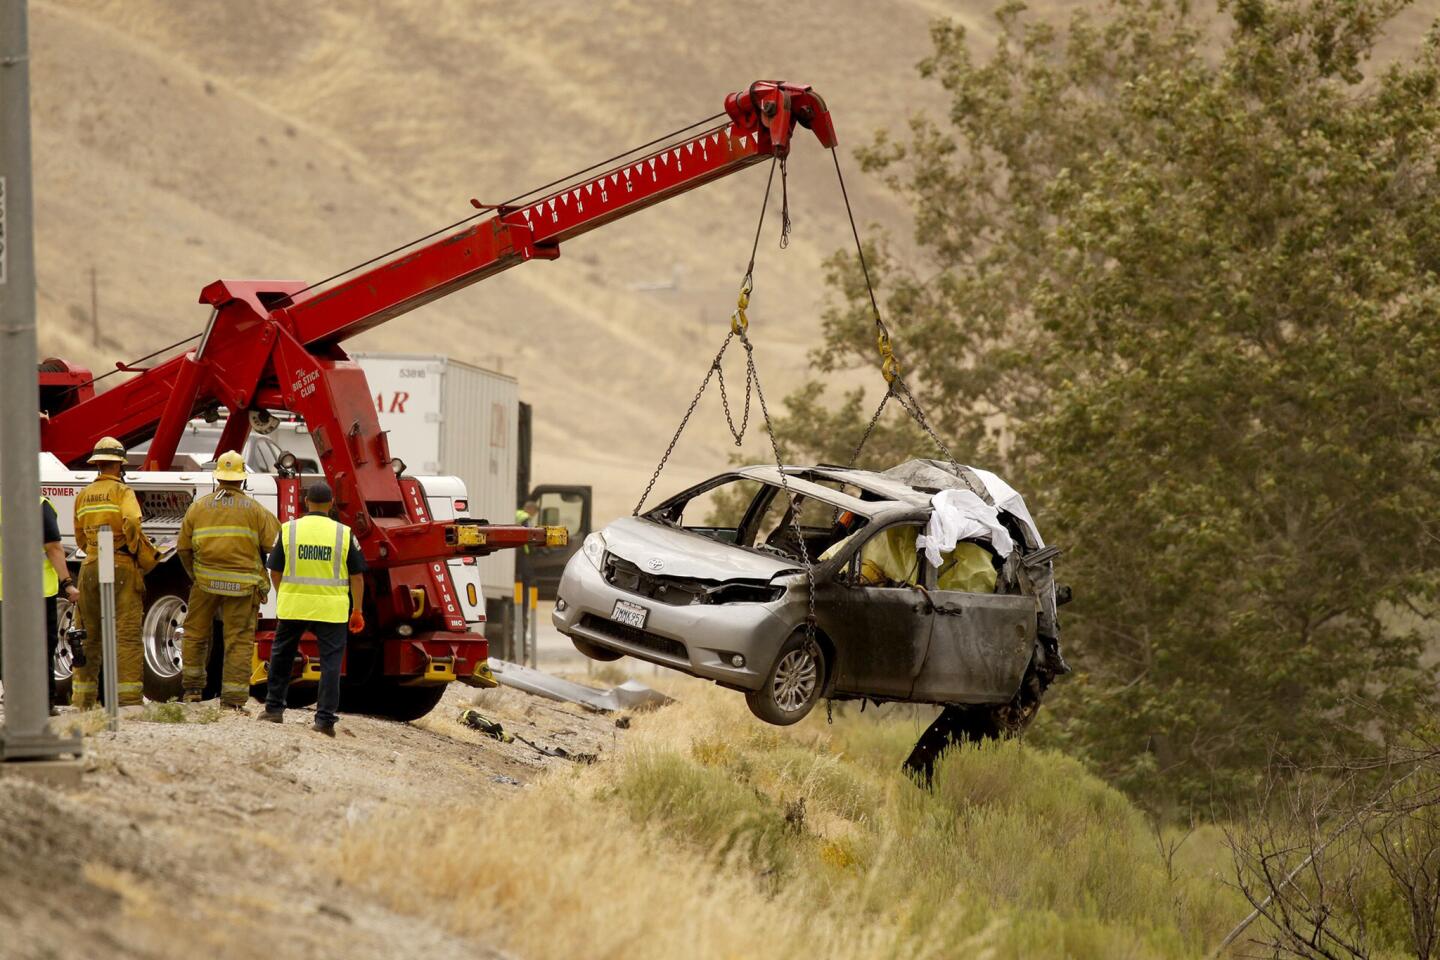 A heavy tow truck lifts a vehicle to the side of the 5 freeway as investigators look over the scene of an accident on Tuesday, June 28, 2016 in Gorman, Calif. A minivan got in a minor collision and stopped on the shoulder. It was still partially in a lane when a semitrailer hit it and it burst into flames with two women and children inside, California Highway Patrol Officer Monica Posada said.